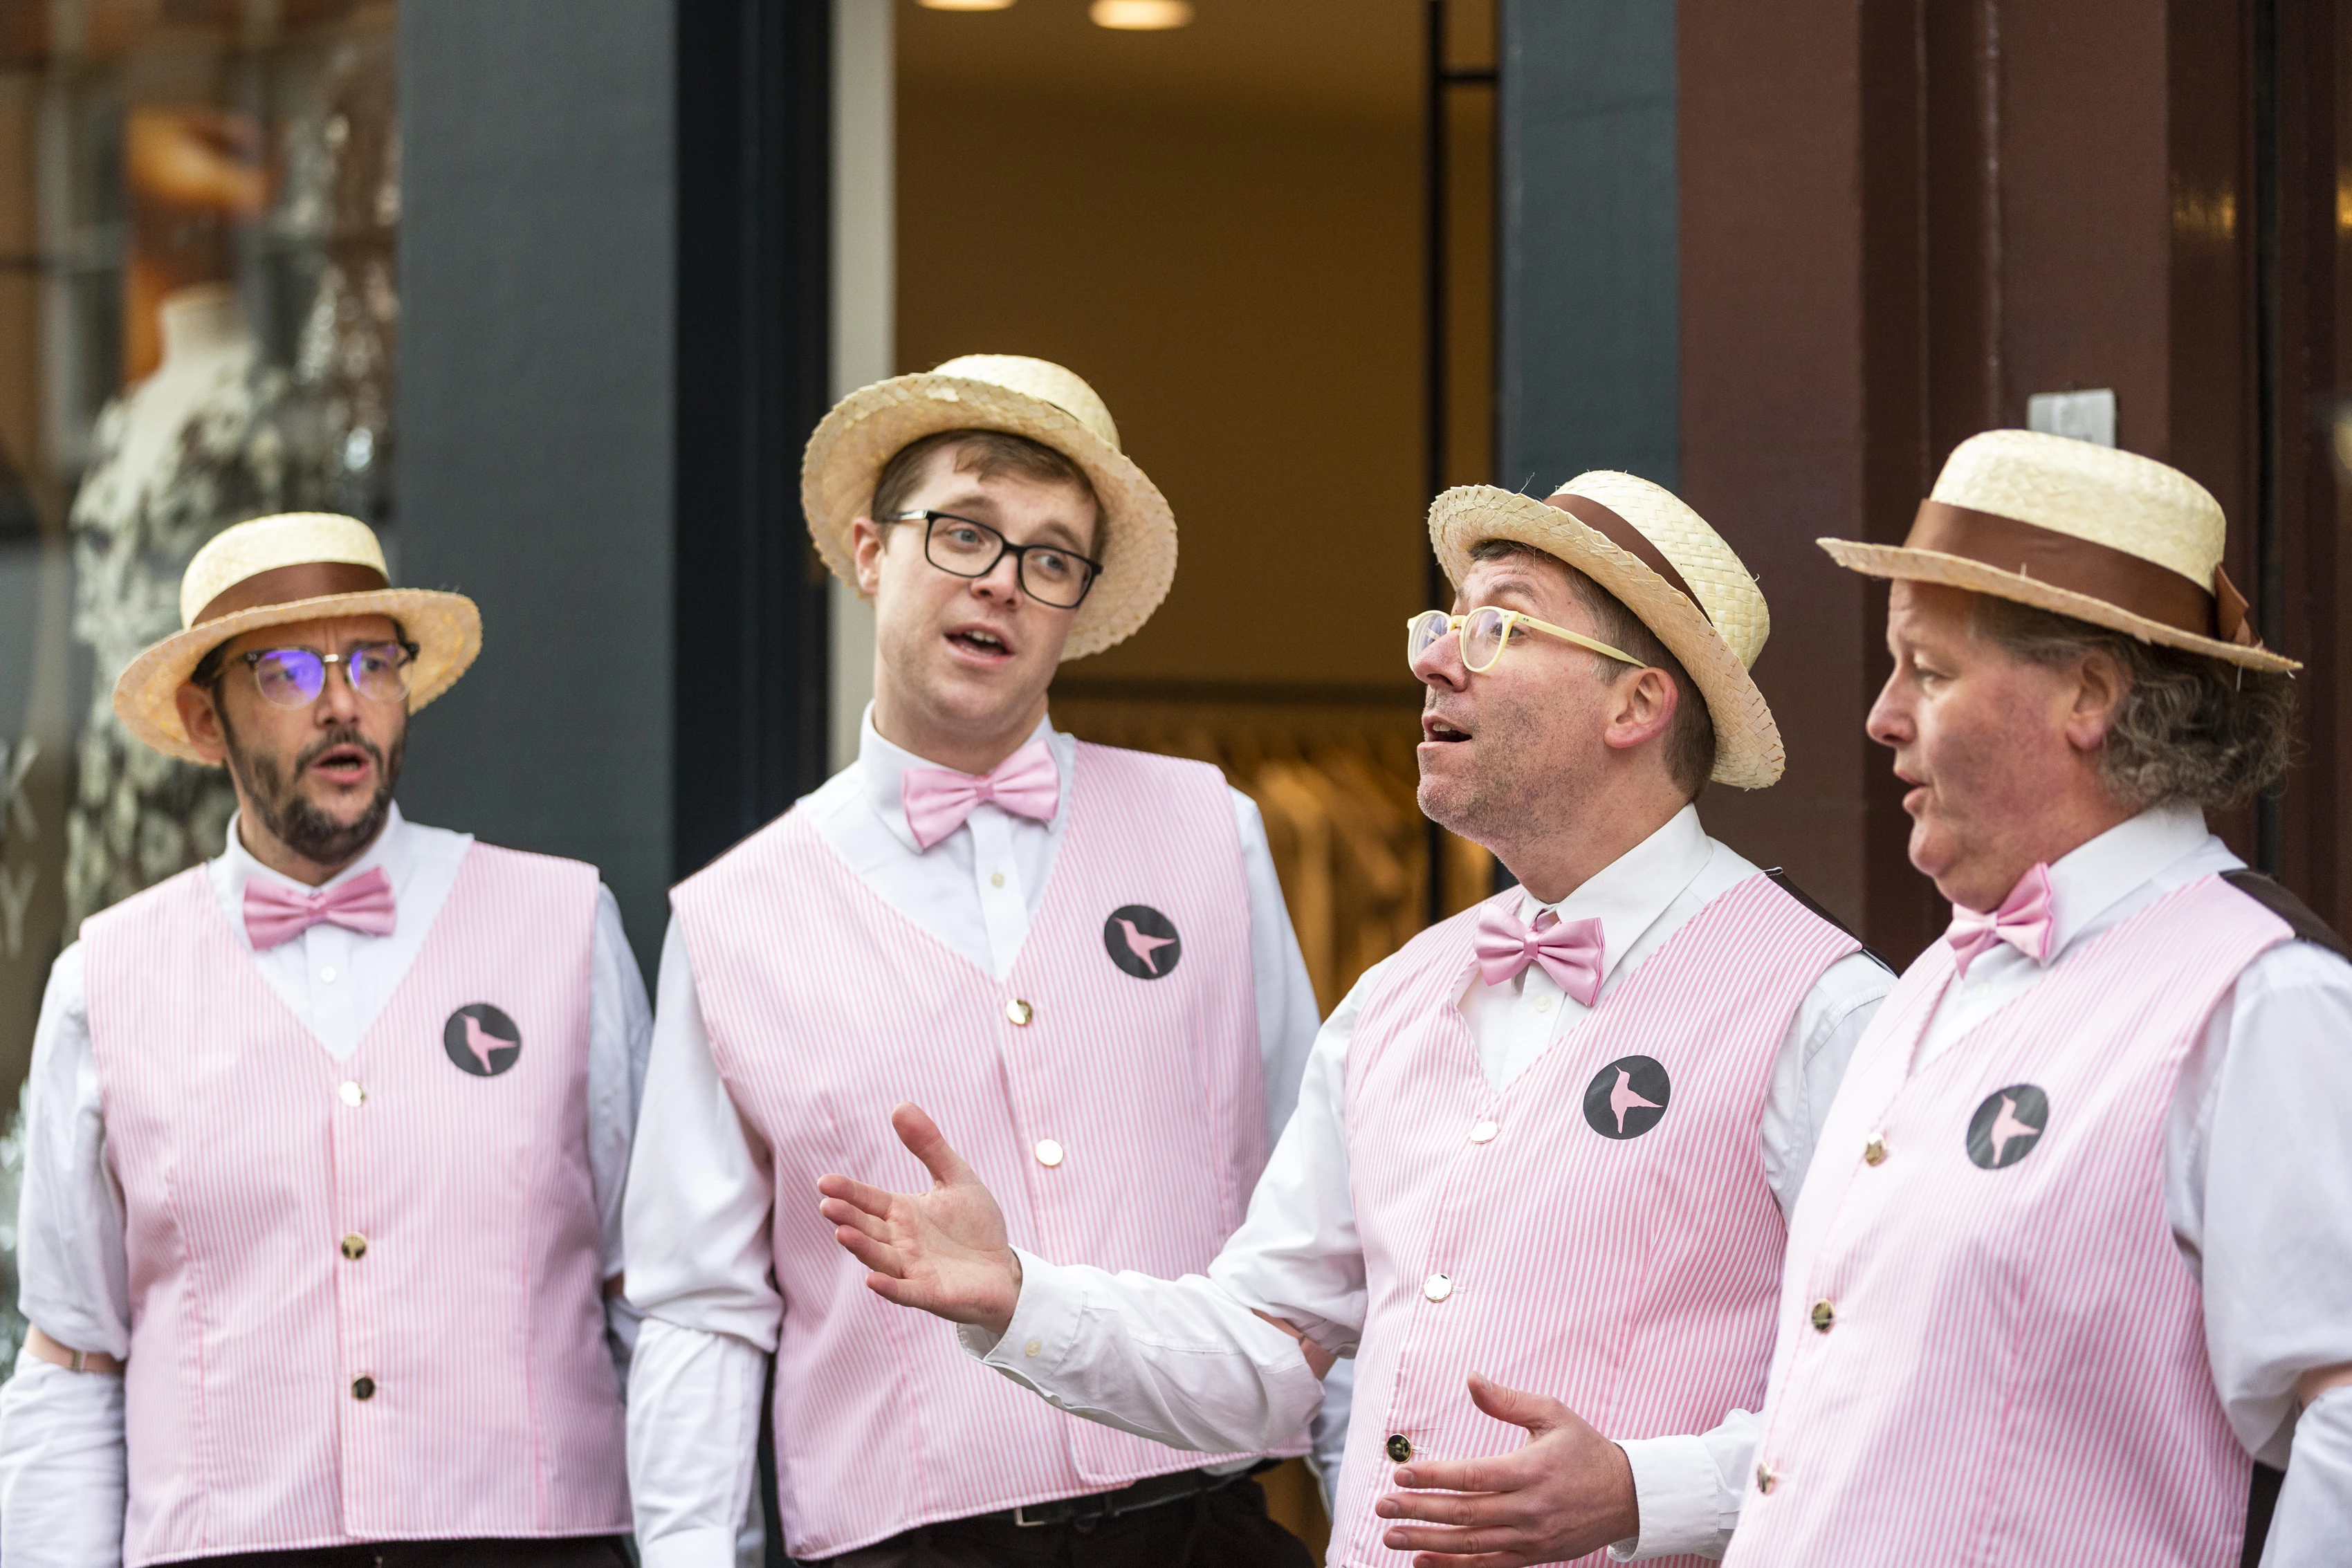 The Bakershop Quartet performs outside one of the Hummingbird Bakery's venues.